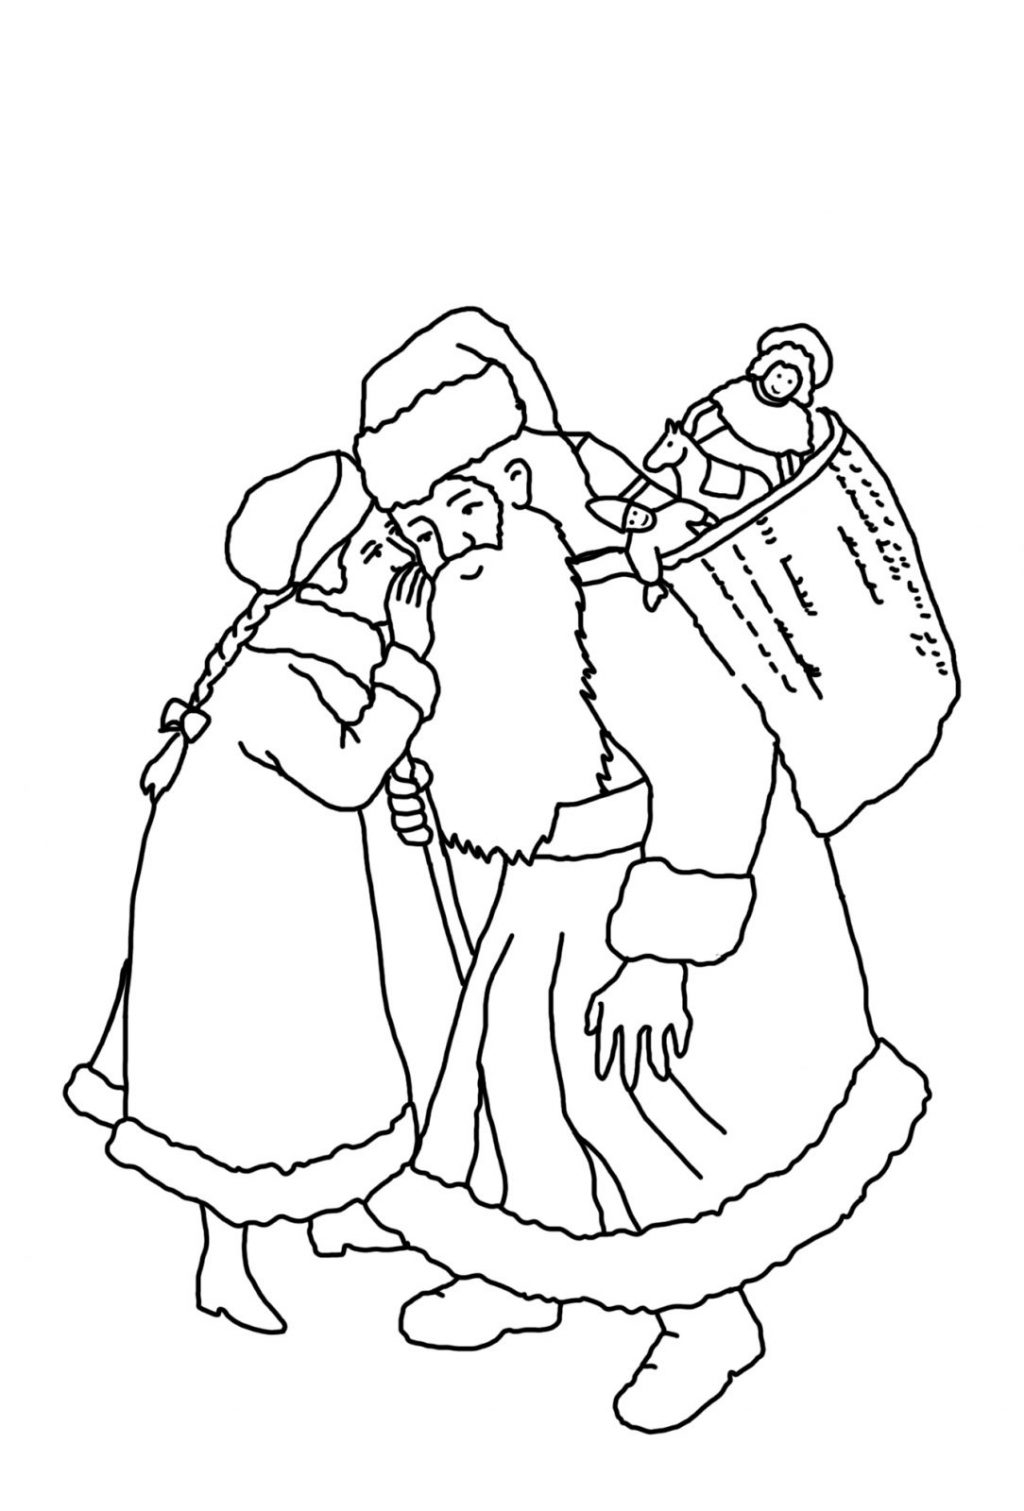 Jesus Christmas Coloring Pages Coloring Books Easy Christmas Coloring Pages Cookies Book For